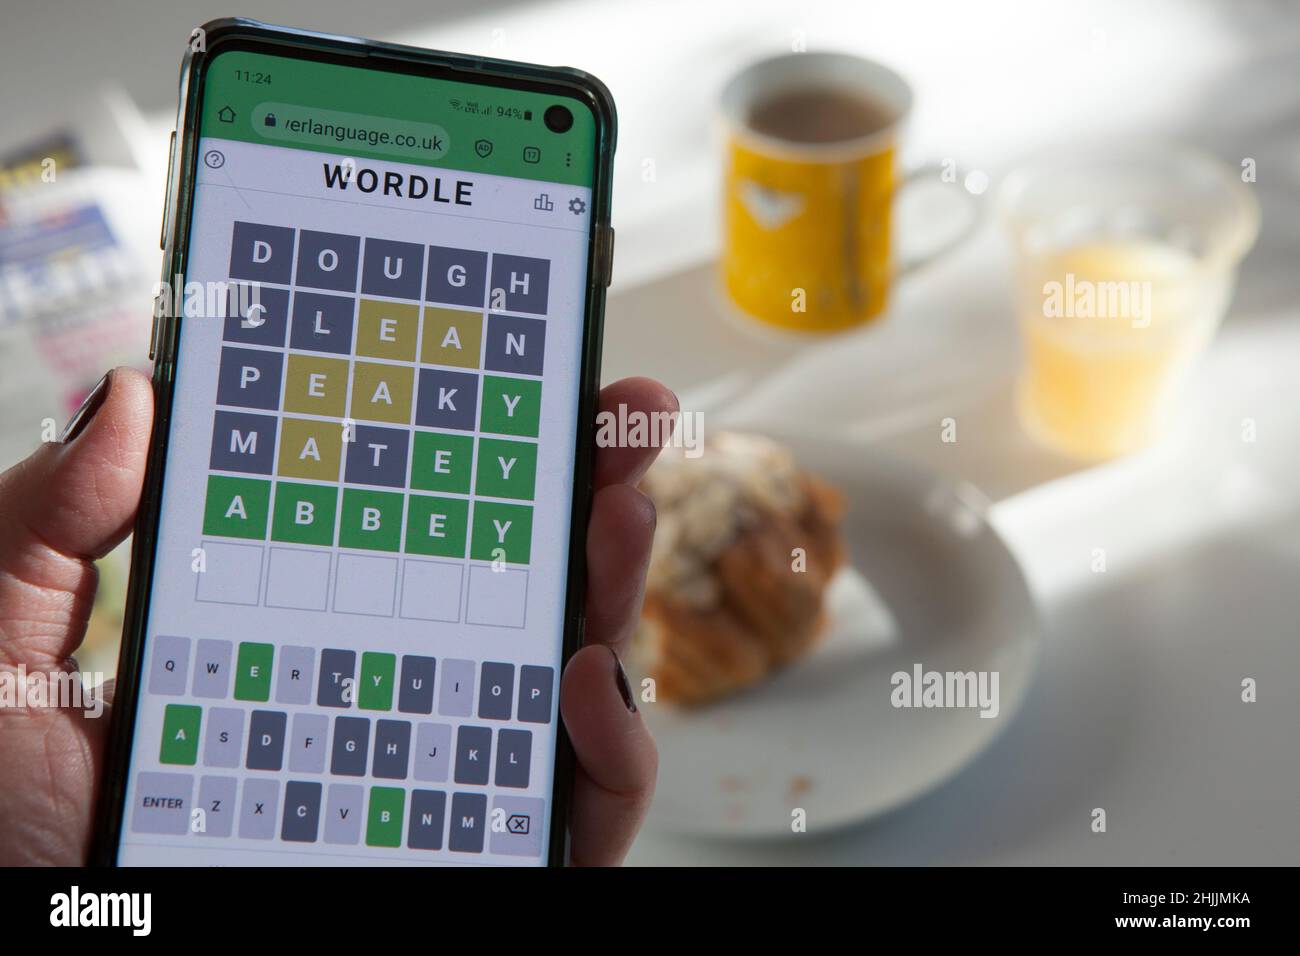 A Wordle player does the daily word puzzle over breakfast. The game, created by Josh Wardle, has been sold to the New York Times. Anna Watson/Alamy Stock Photo